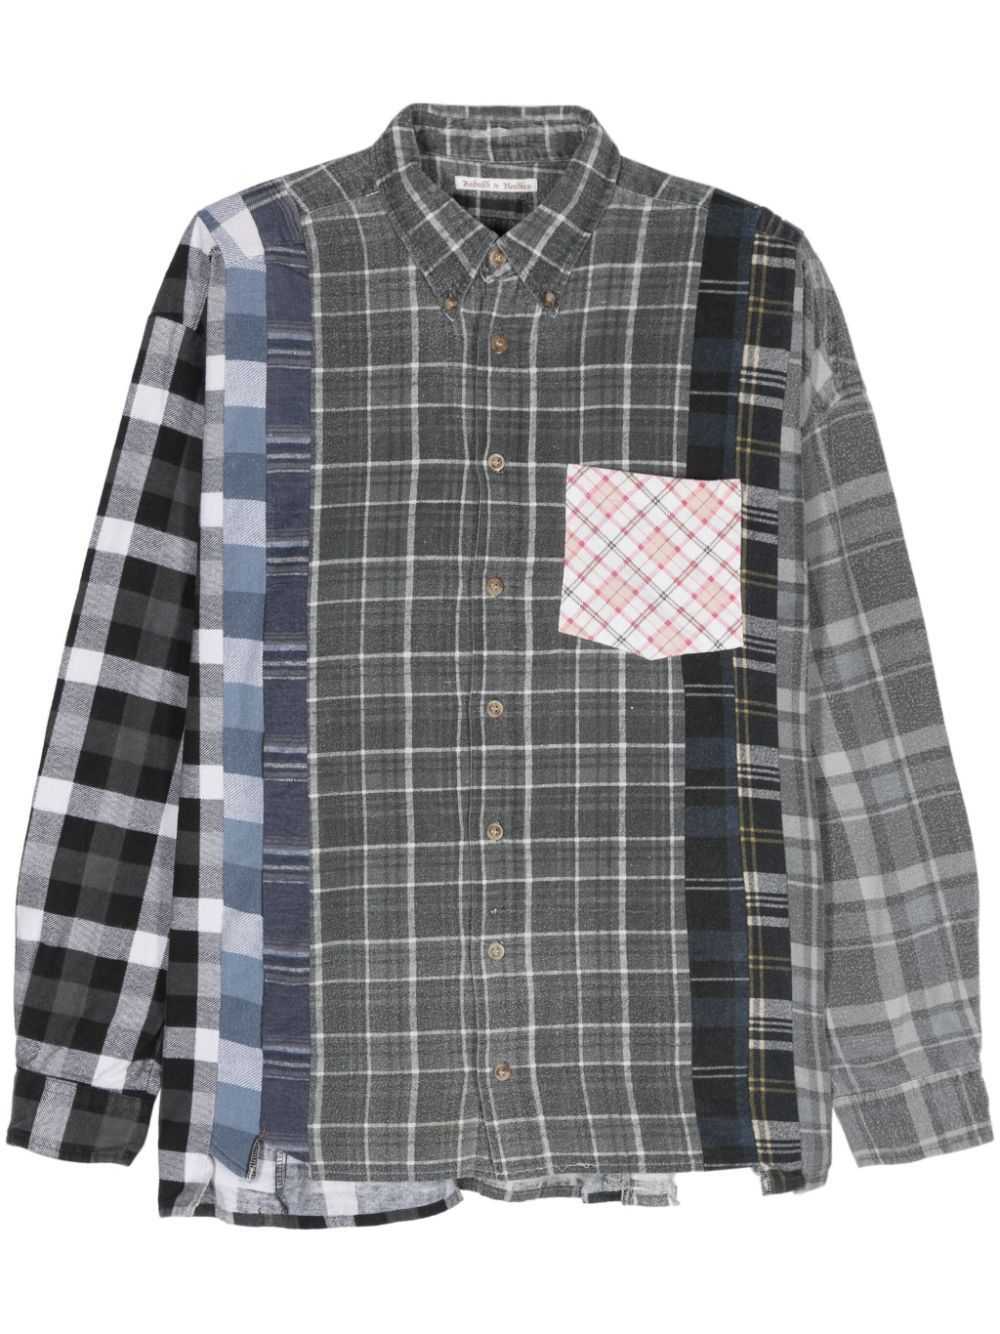 Needles 7 Cuts Patchwork Shirt In Grey